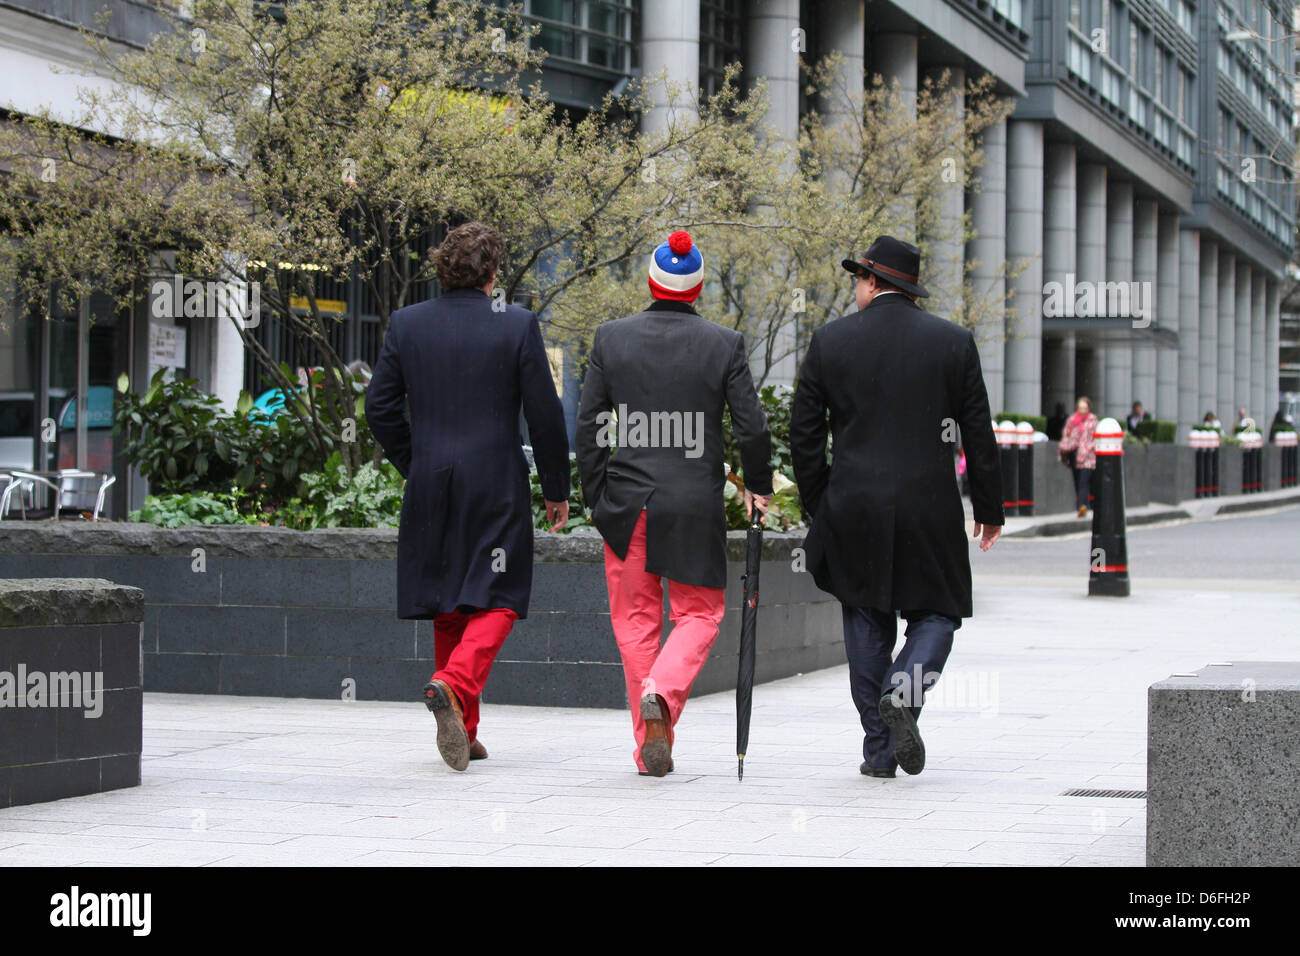 London, UK. 17th April 2013. The Funeral of Baroness Margaret Thatcher. Three gentlemen walk away from Ludgate Circus. The Funeral service takes place in St. Paul's Cathedral, London. Pic: Paul Marriott Photography/Alamy Live News Stock Photo